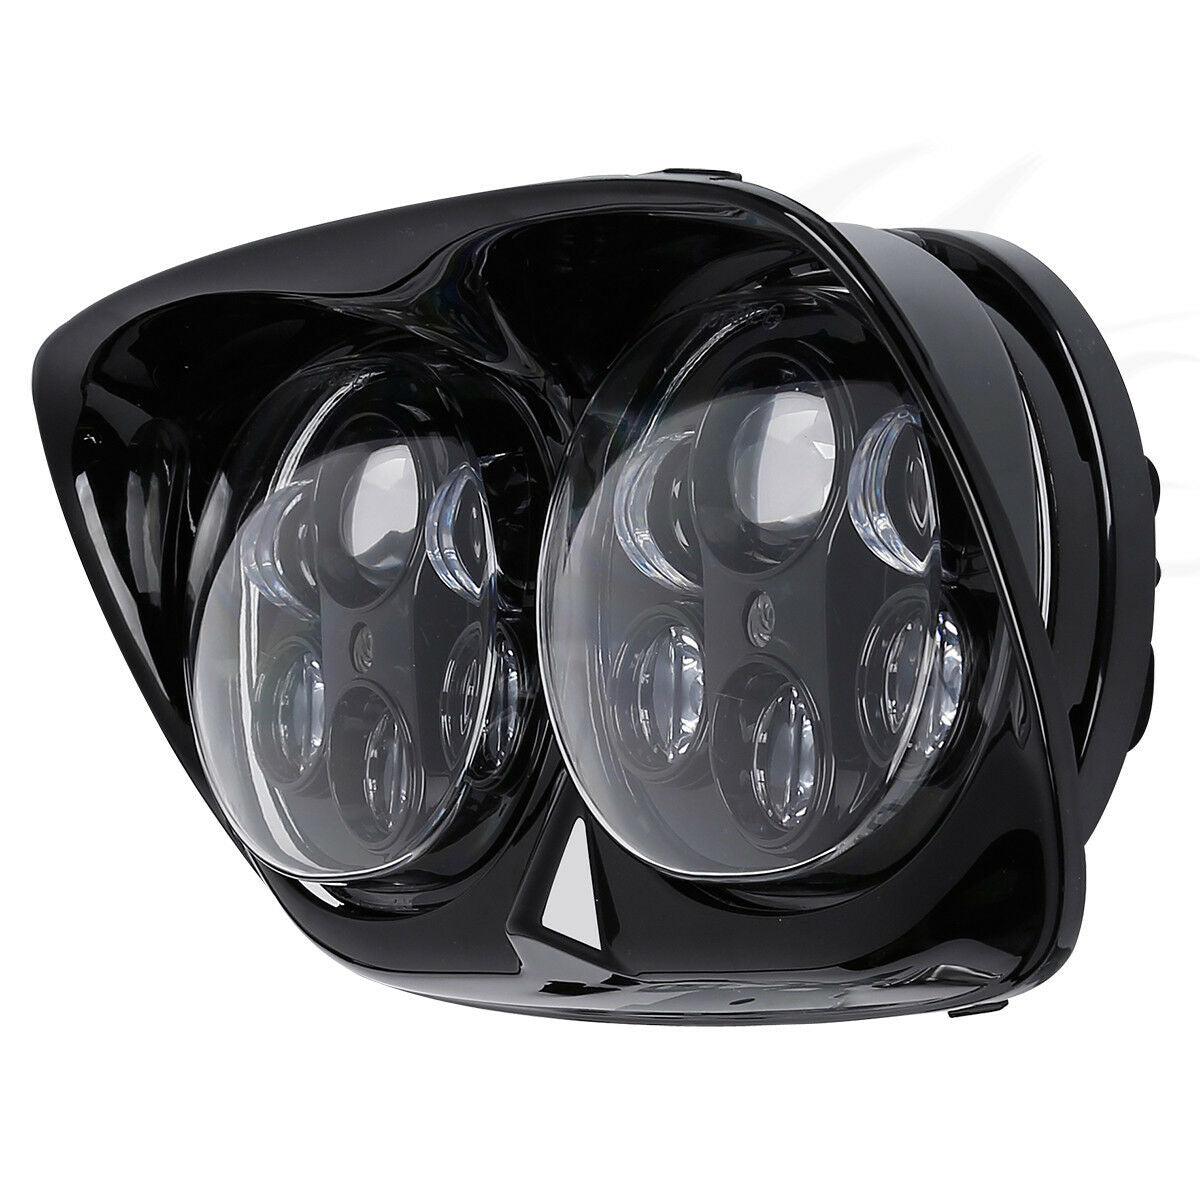 5.75" Dual LED Headlight Projector Lamp Fit For Harley Touring Road Glide 98-13 - Moto Life Products